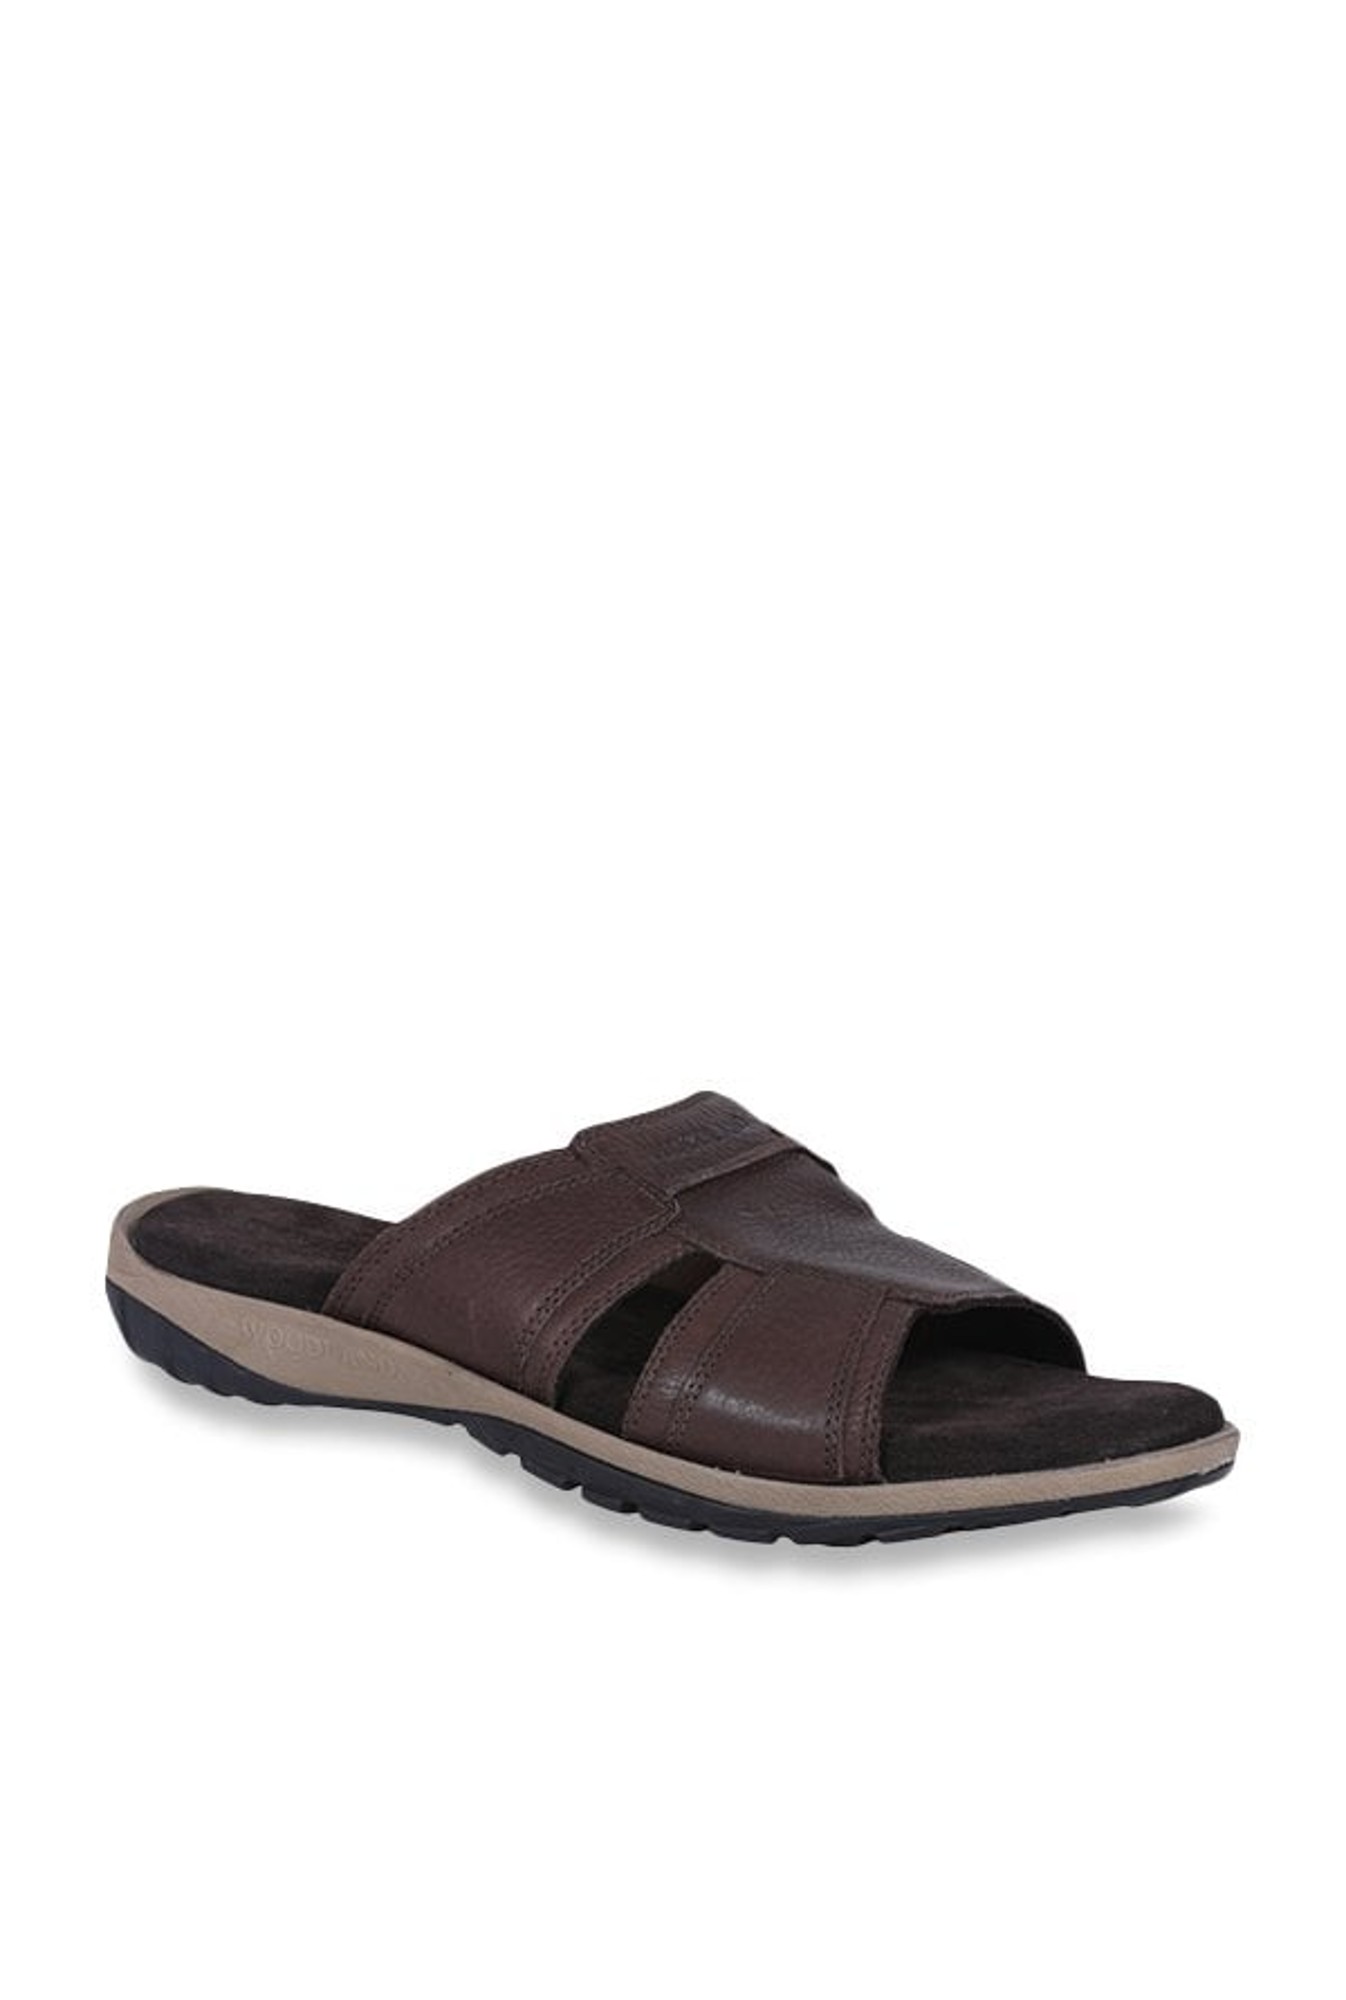 woodland casual sandals